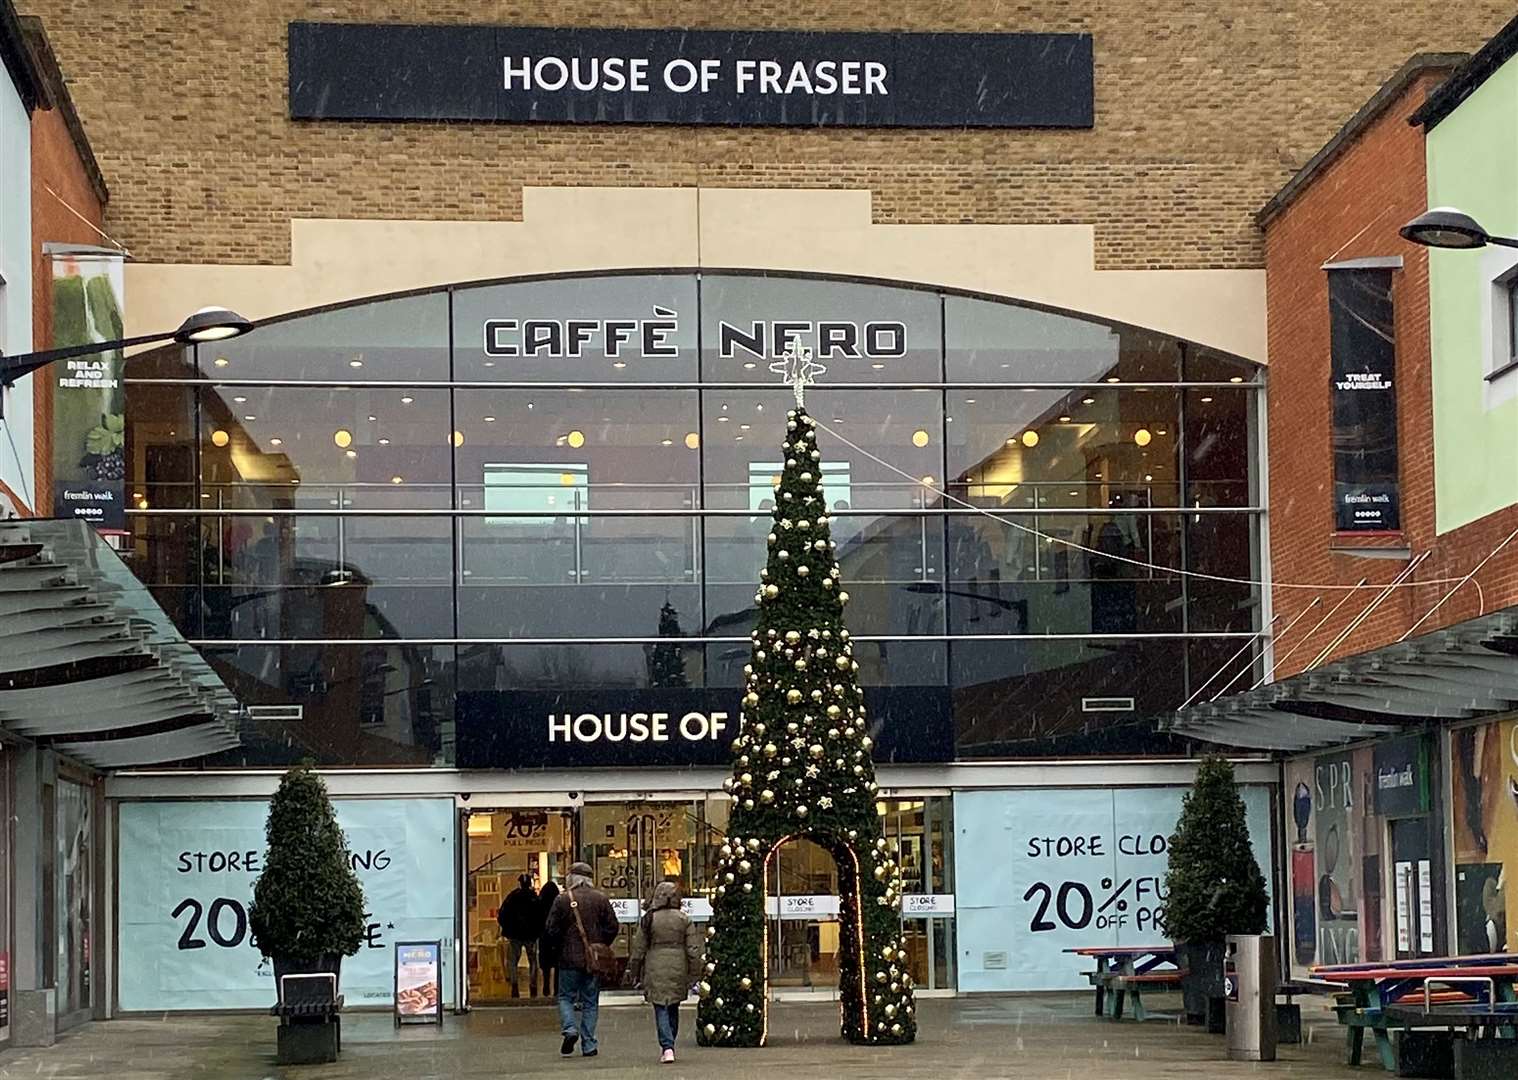 House of Fraser in Fremlin Walk, Maidstone, will be closing down for a refit